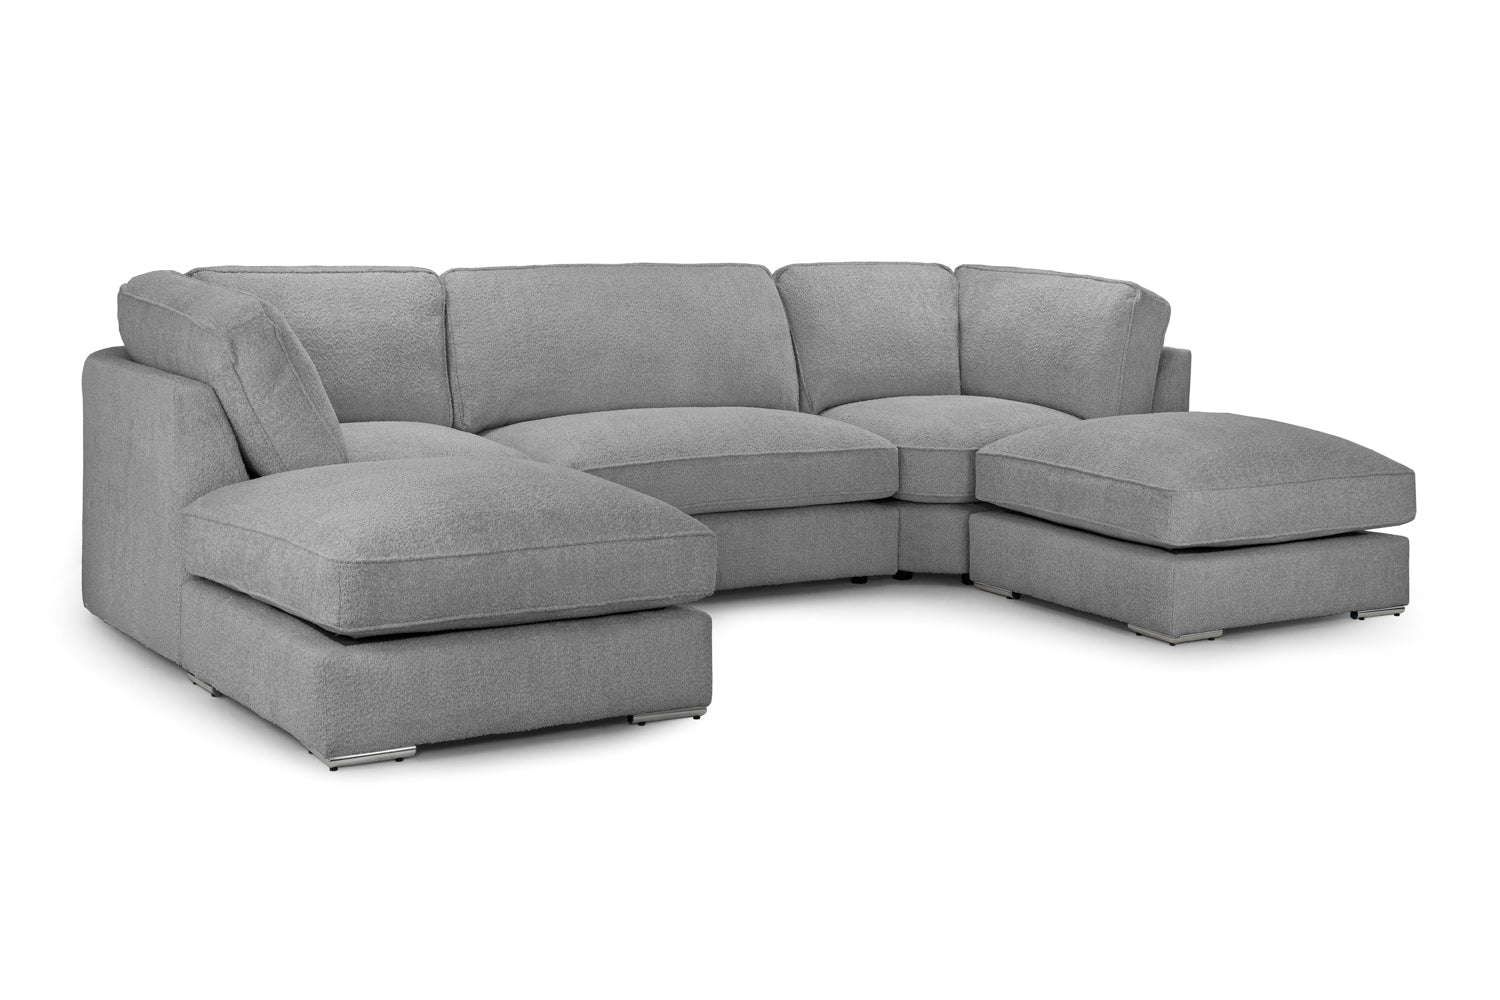 Stylish and comfortable Inga U Shape Grey Corner Sofa upholstered in soft bouclé fabric with large movable footstools and low-profile chrome feet.